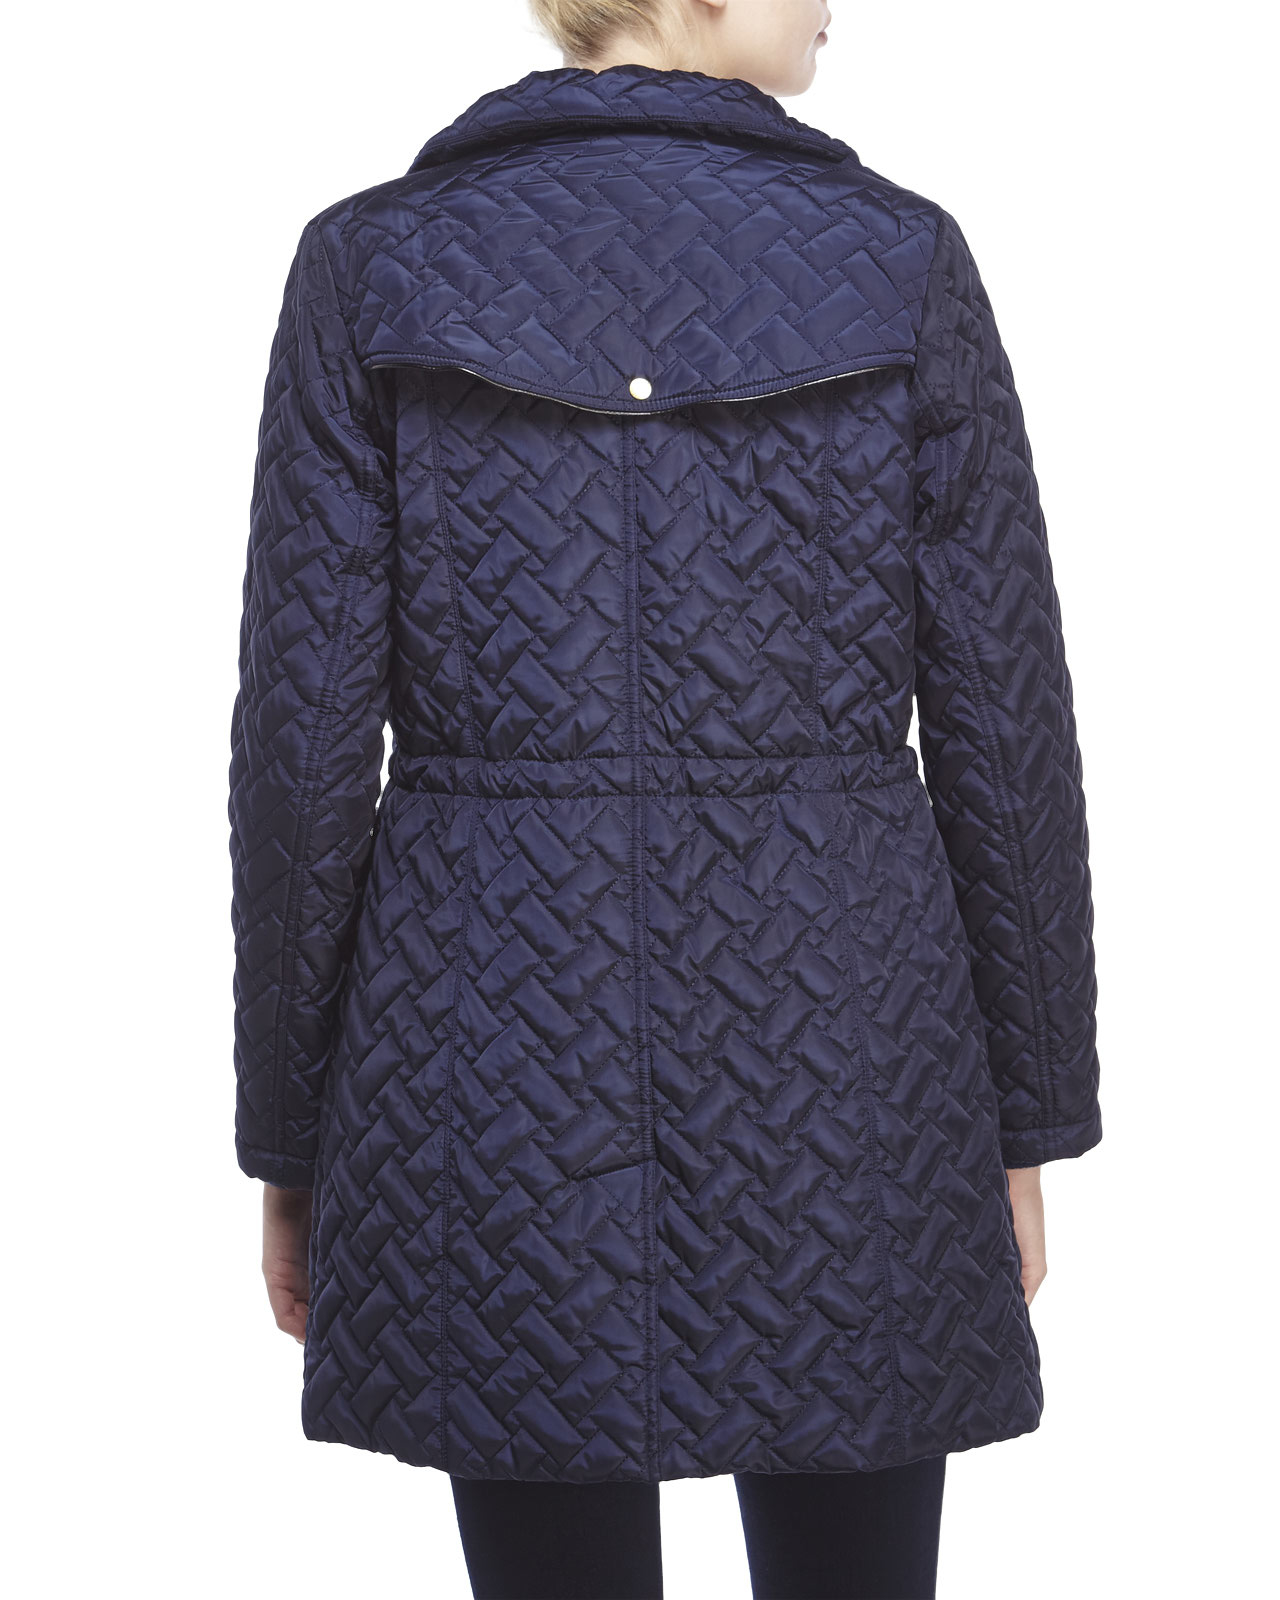 Cole Haan Signature Quilted Jacket in Blue - Lyst